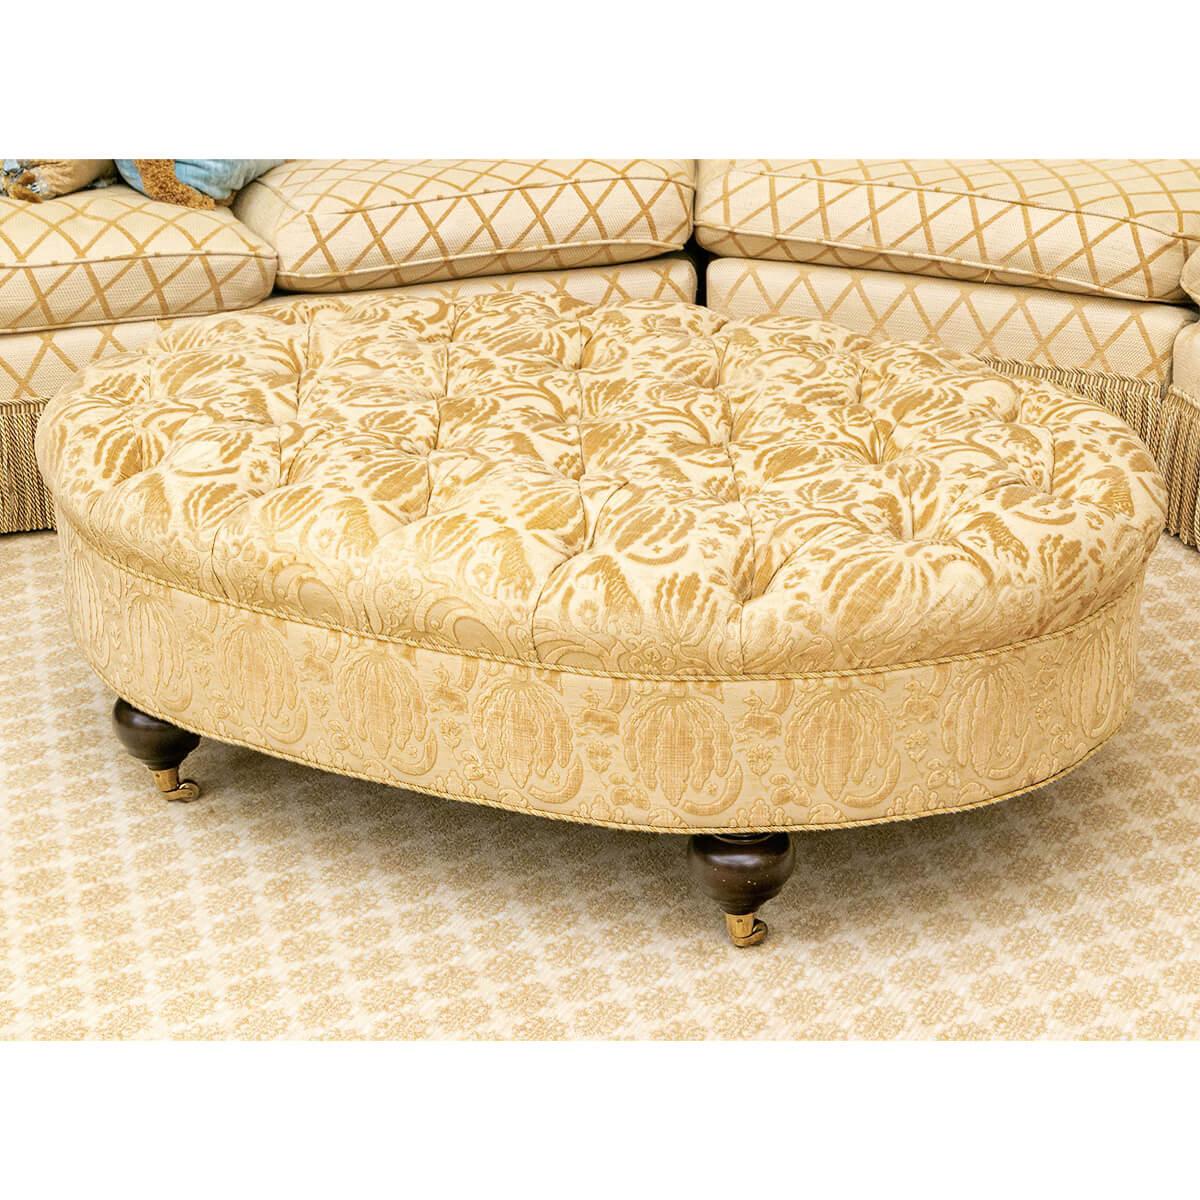 A classic form oval button tufted ottoman beautifully upholstered in a high-quality damask fabric with lovely contrasting luster. The piece is further trimmed in a coordinating gimp. The whole rests on four dark stained wood ball form feet with